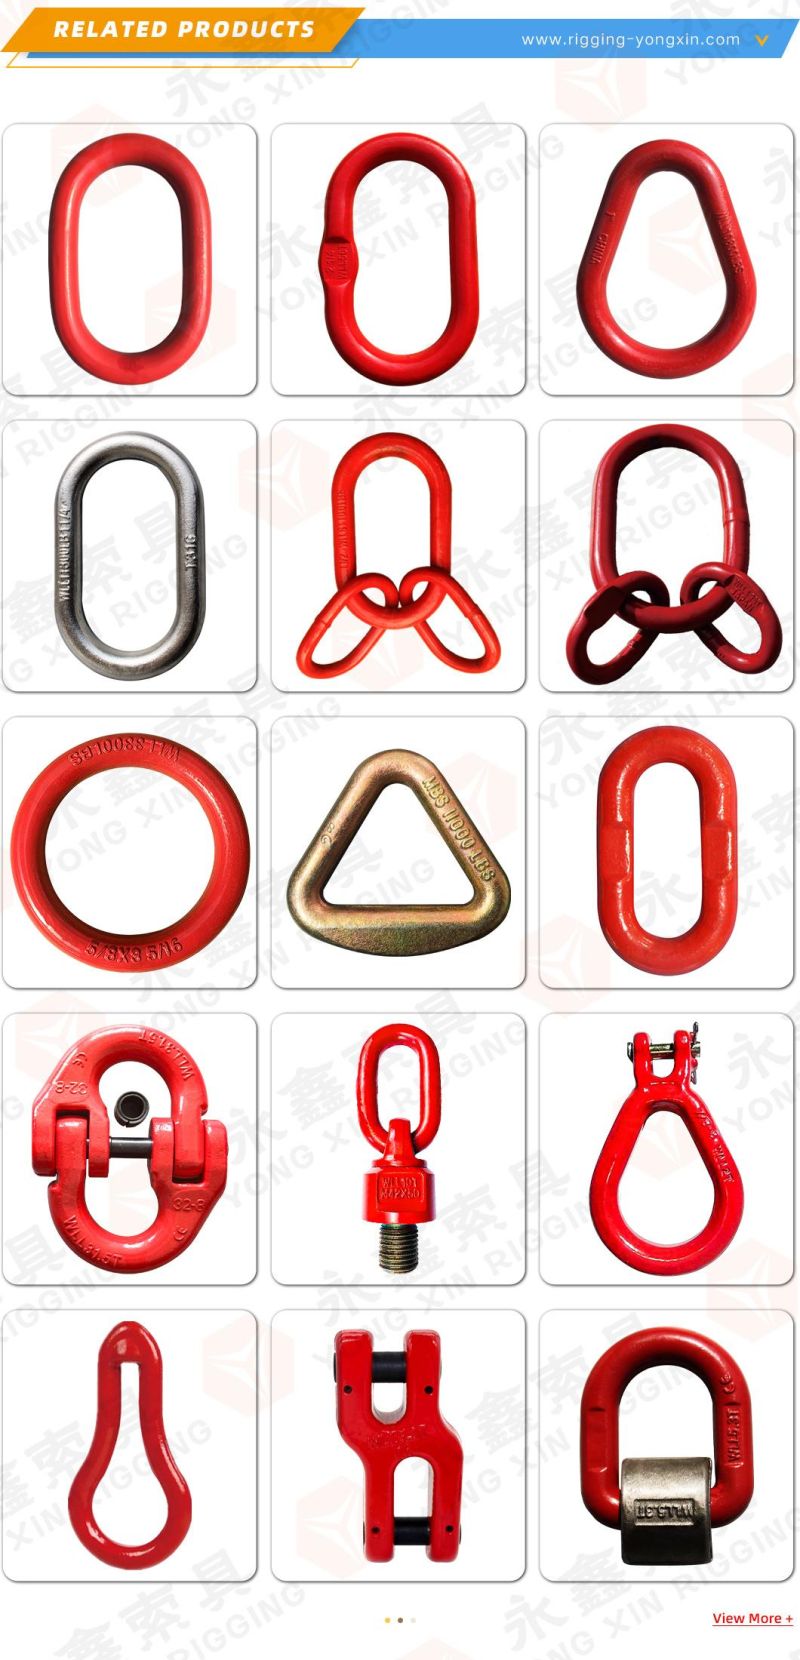 Yongxin Rigging Forged High Quality 50t Alloy Steel G80 Alloy Master Link for Lifting